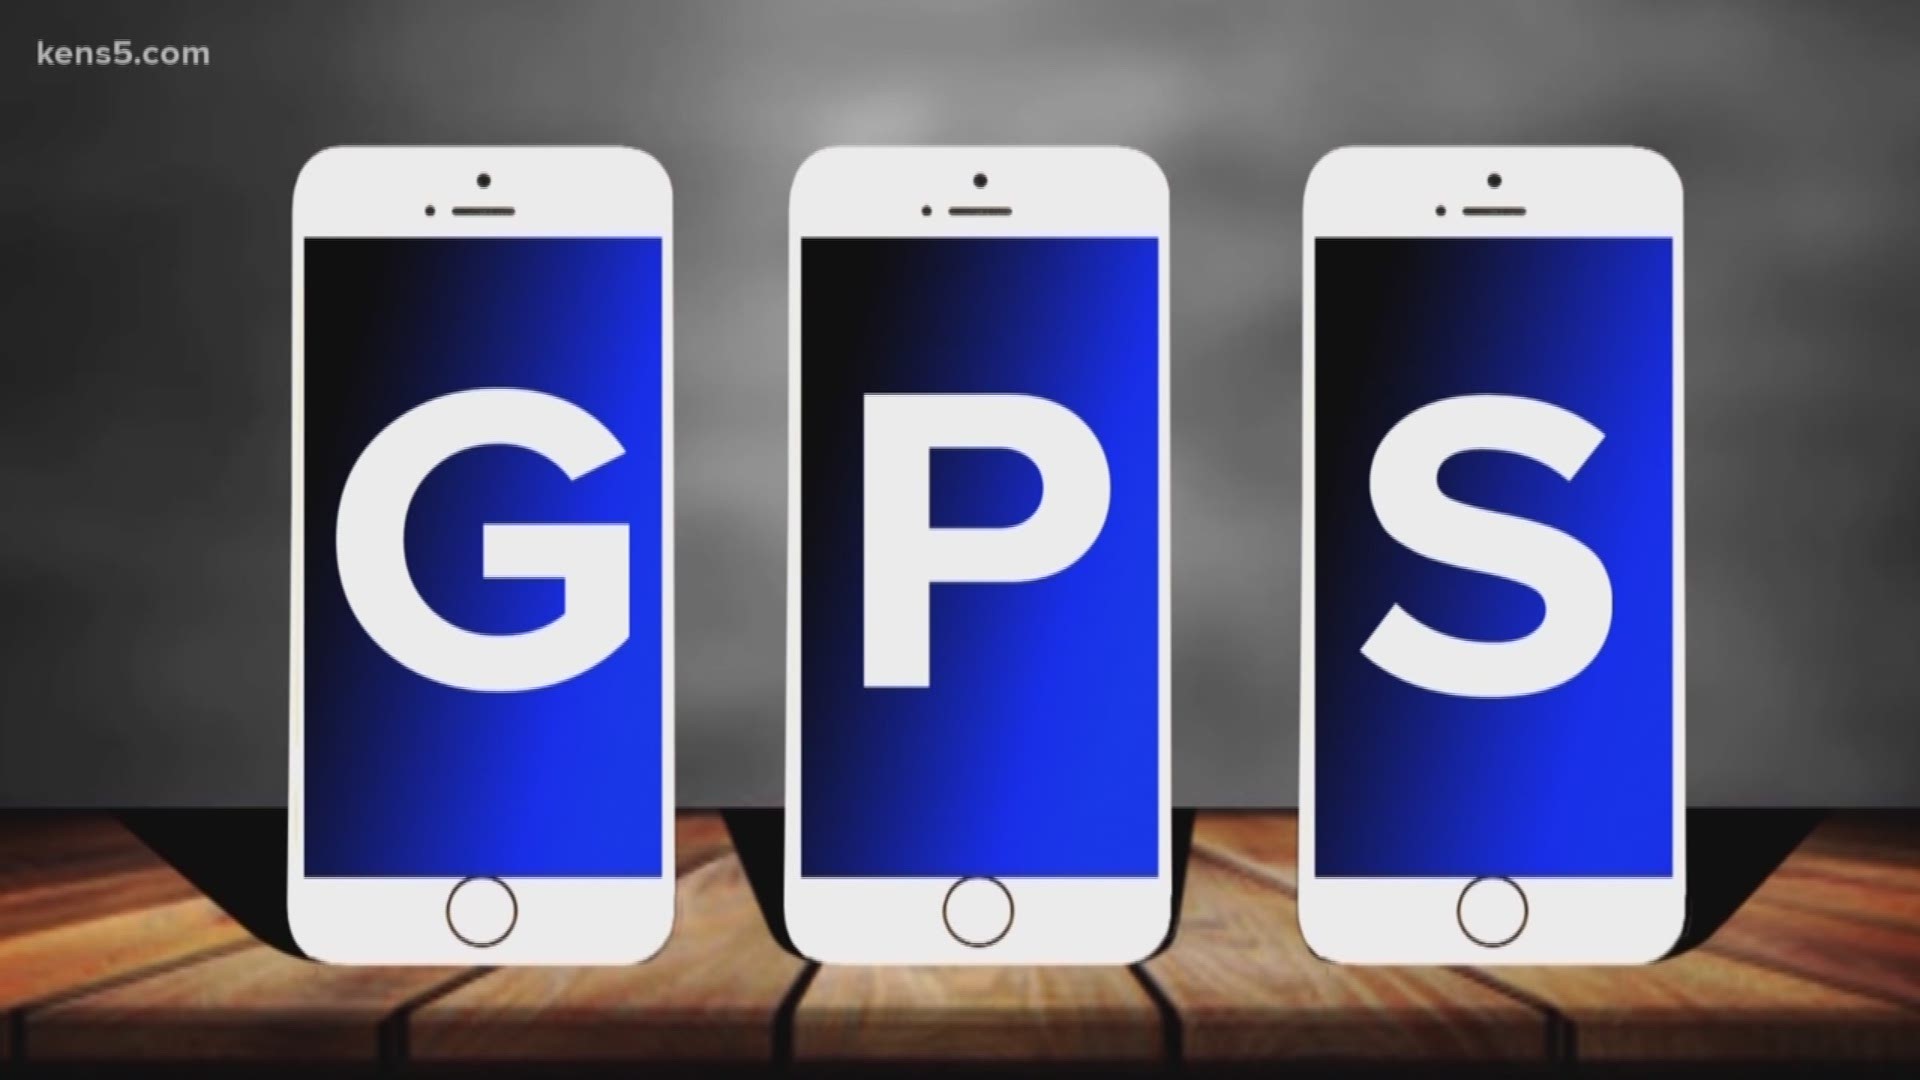 Kids are using smartphone apps to fake their GPS locations. Here's how it works.